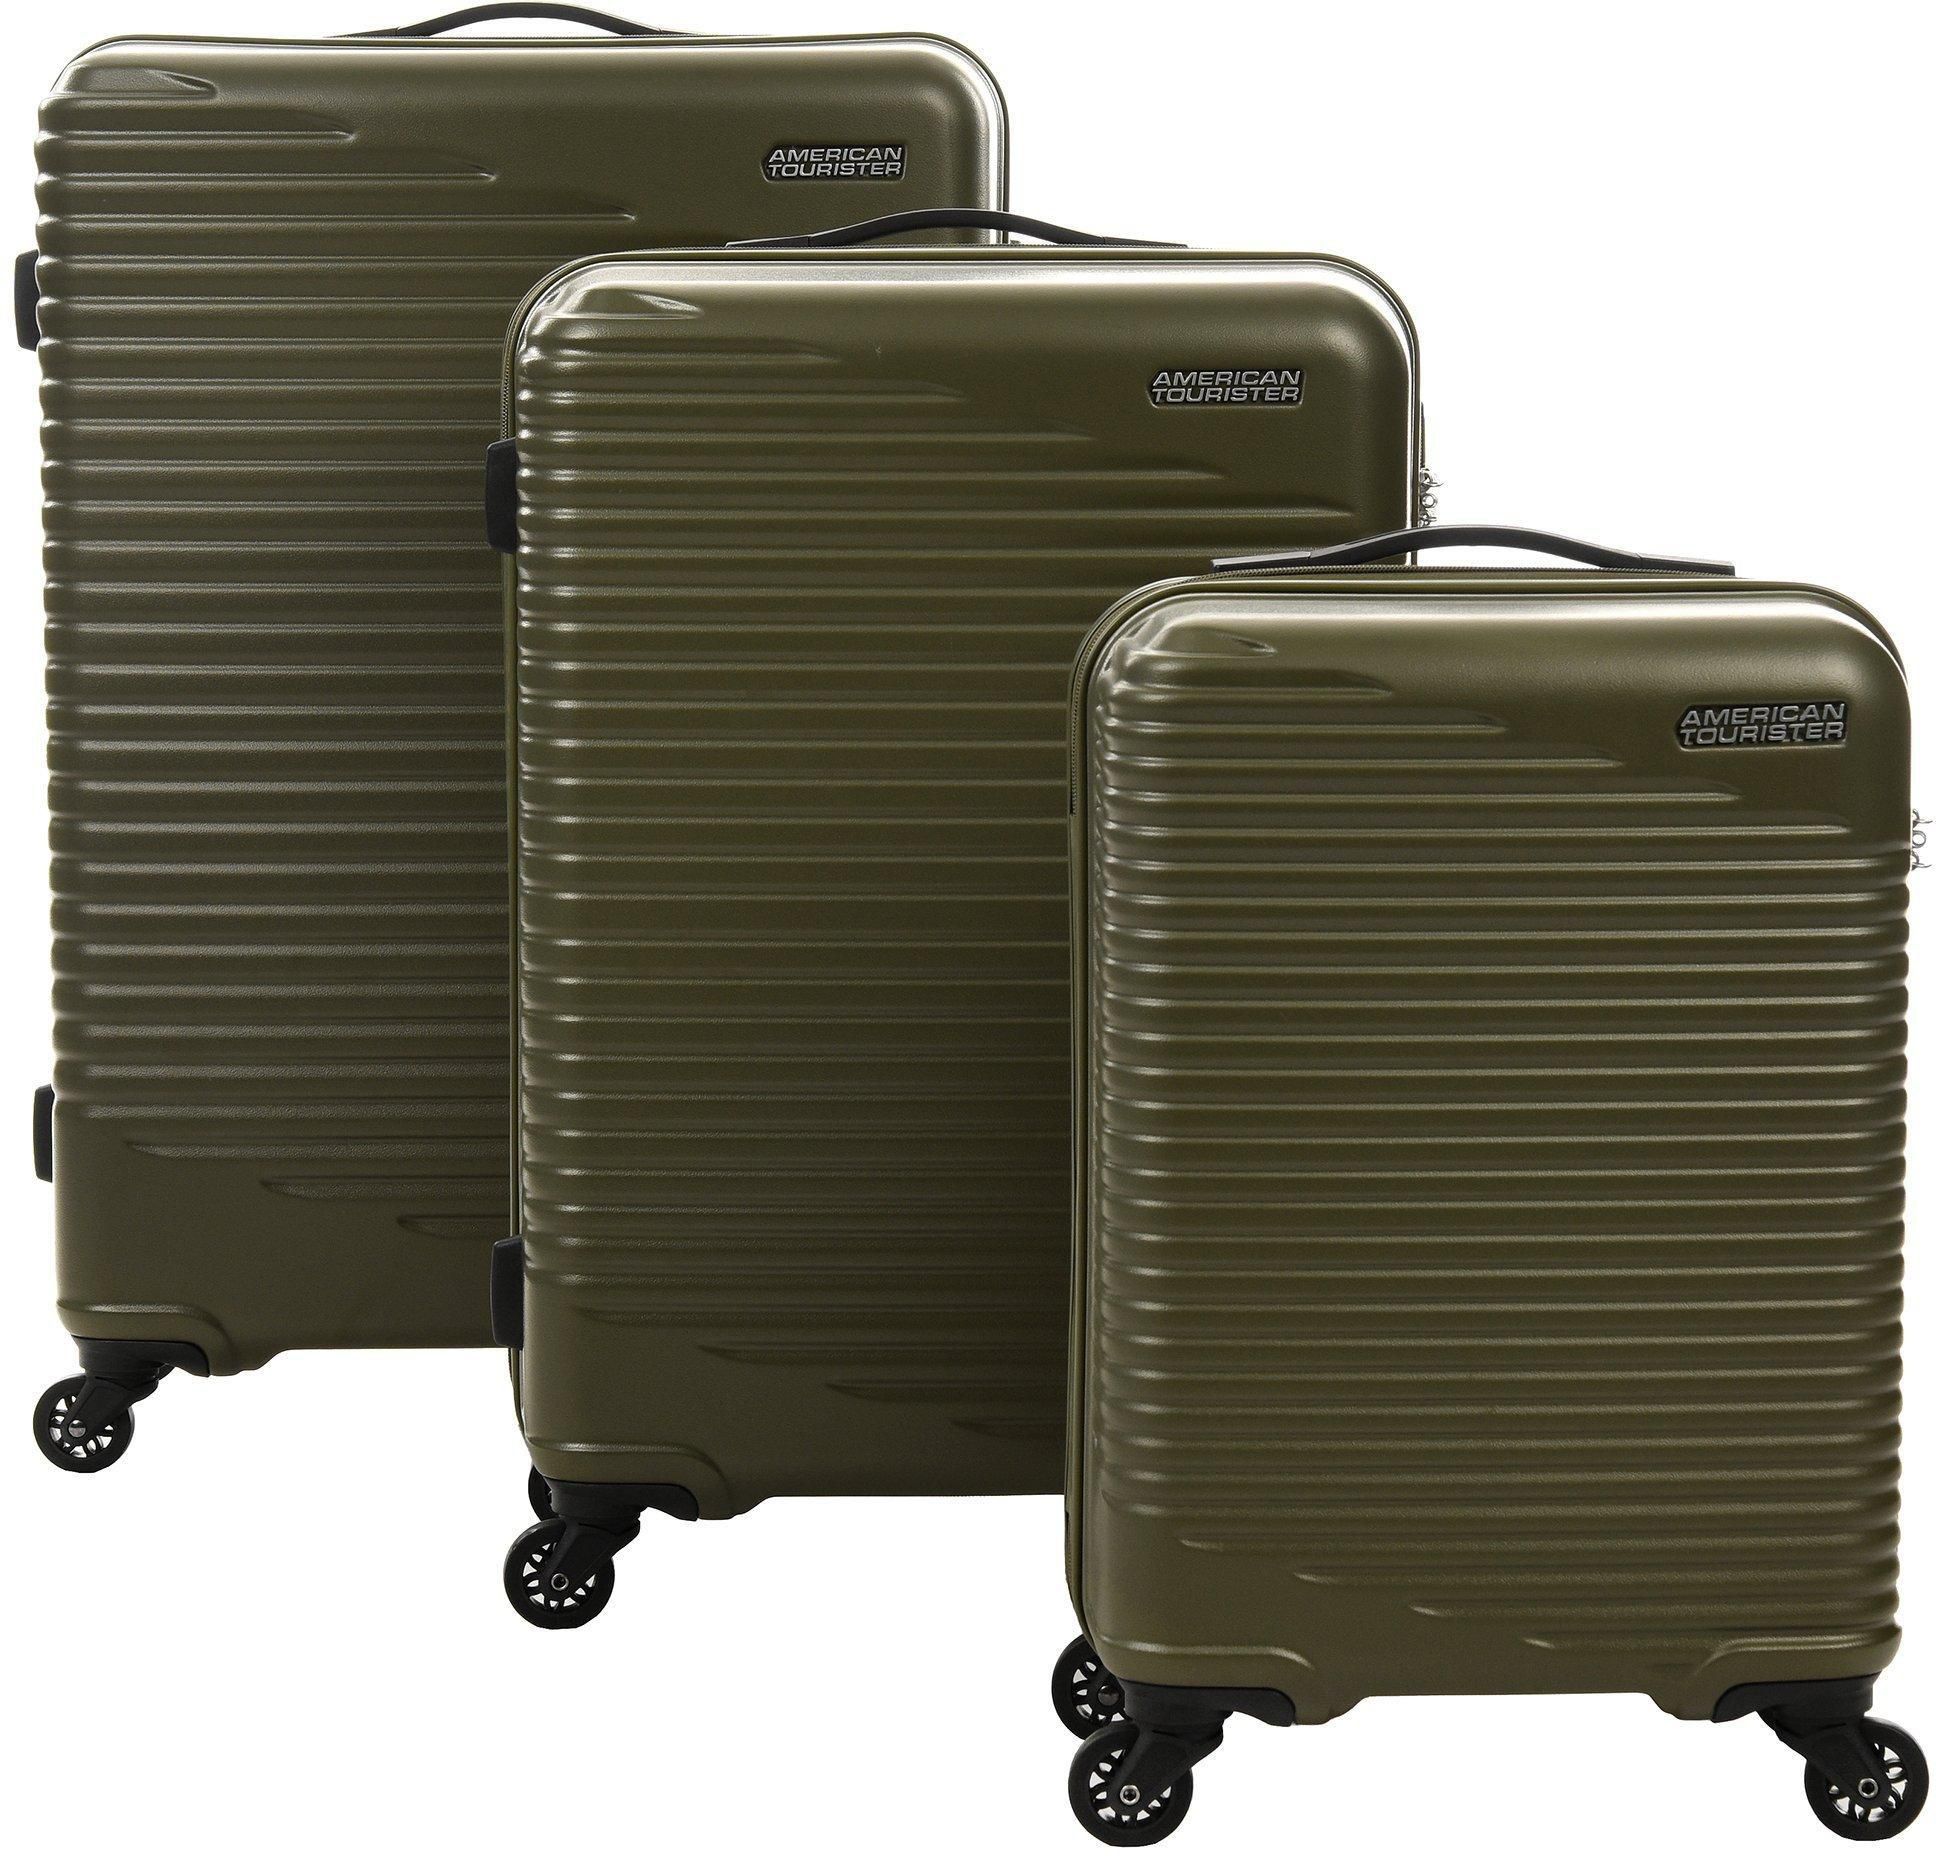 American Tourister Skypark Set of 3Pc HS ABS Hard Luggage, 22/27/31 Inch, Green